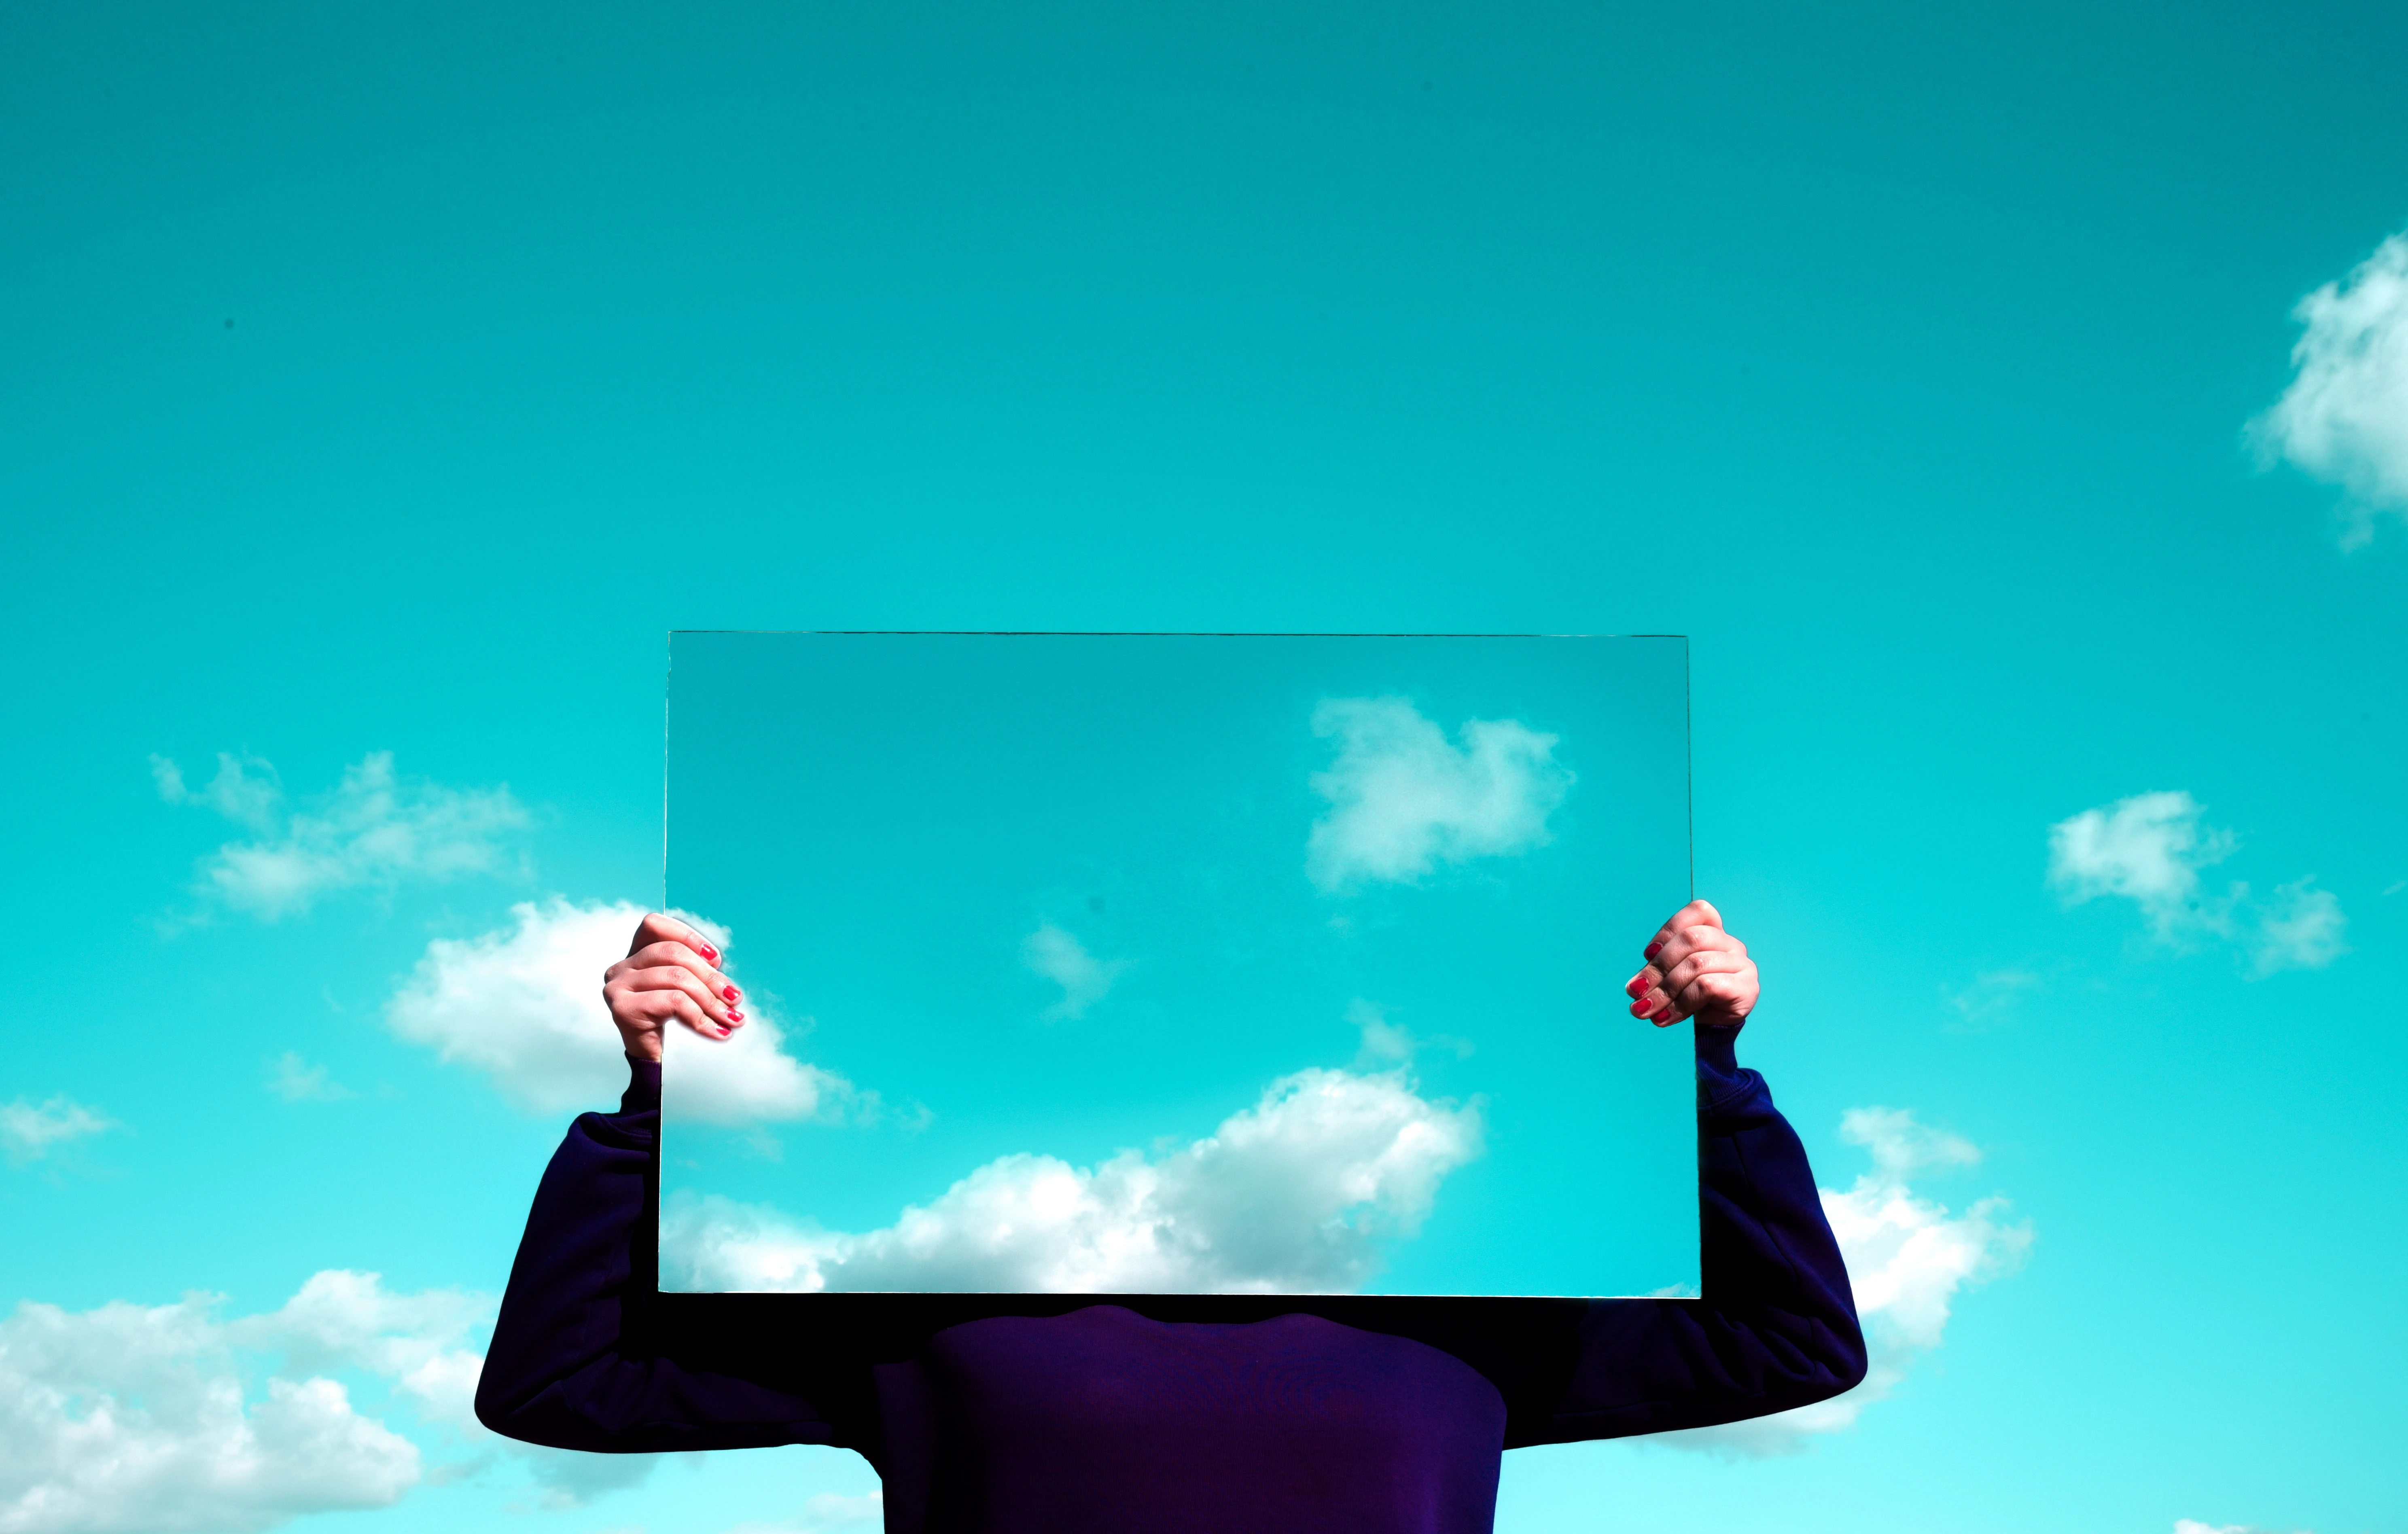 blue sky with clouds behind man in black jumper holding up mirror reflecting the sky and clouds